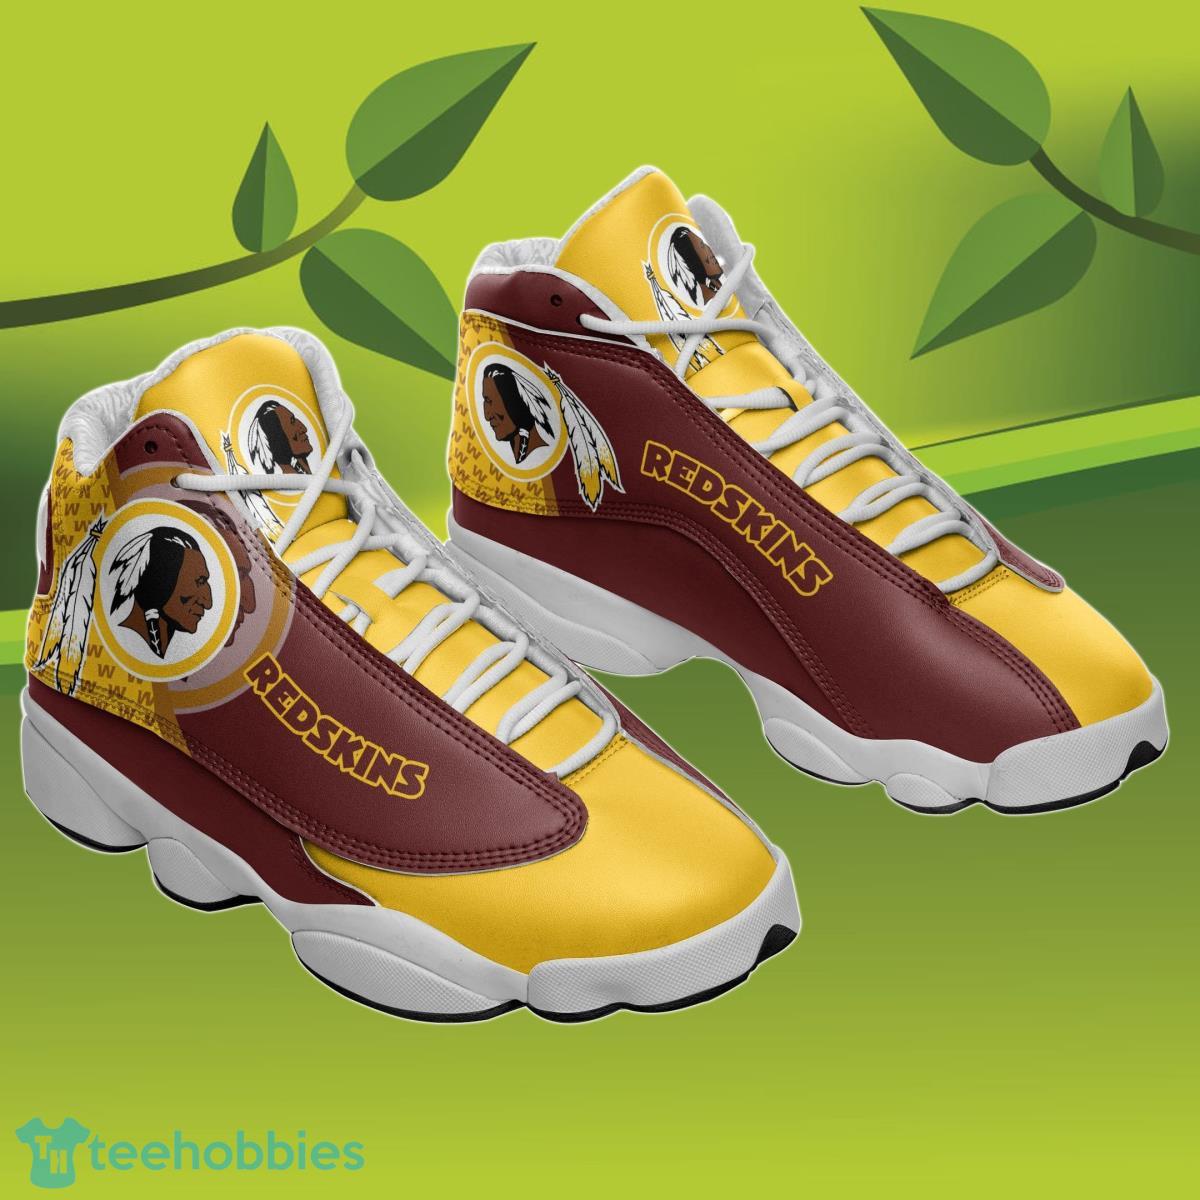 Washington Redskins Air Jordan 13 Sneakers Best Gift For Men And Women Product Photo 2